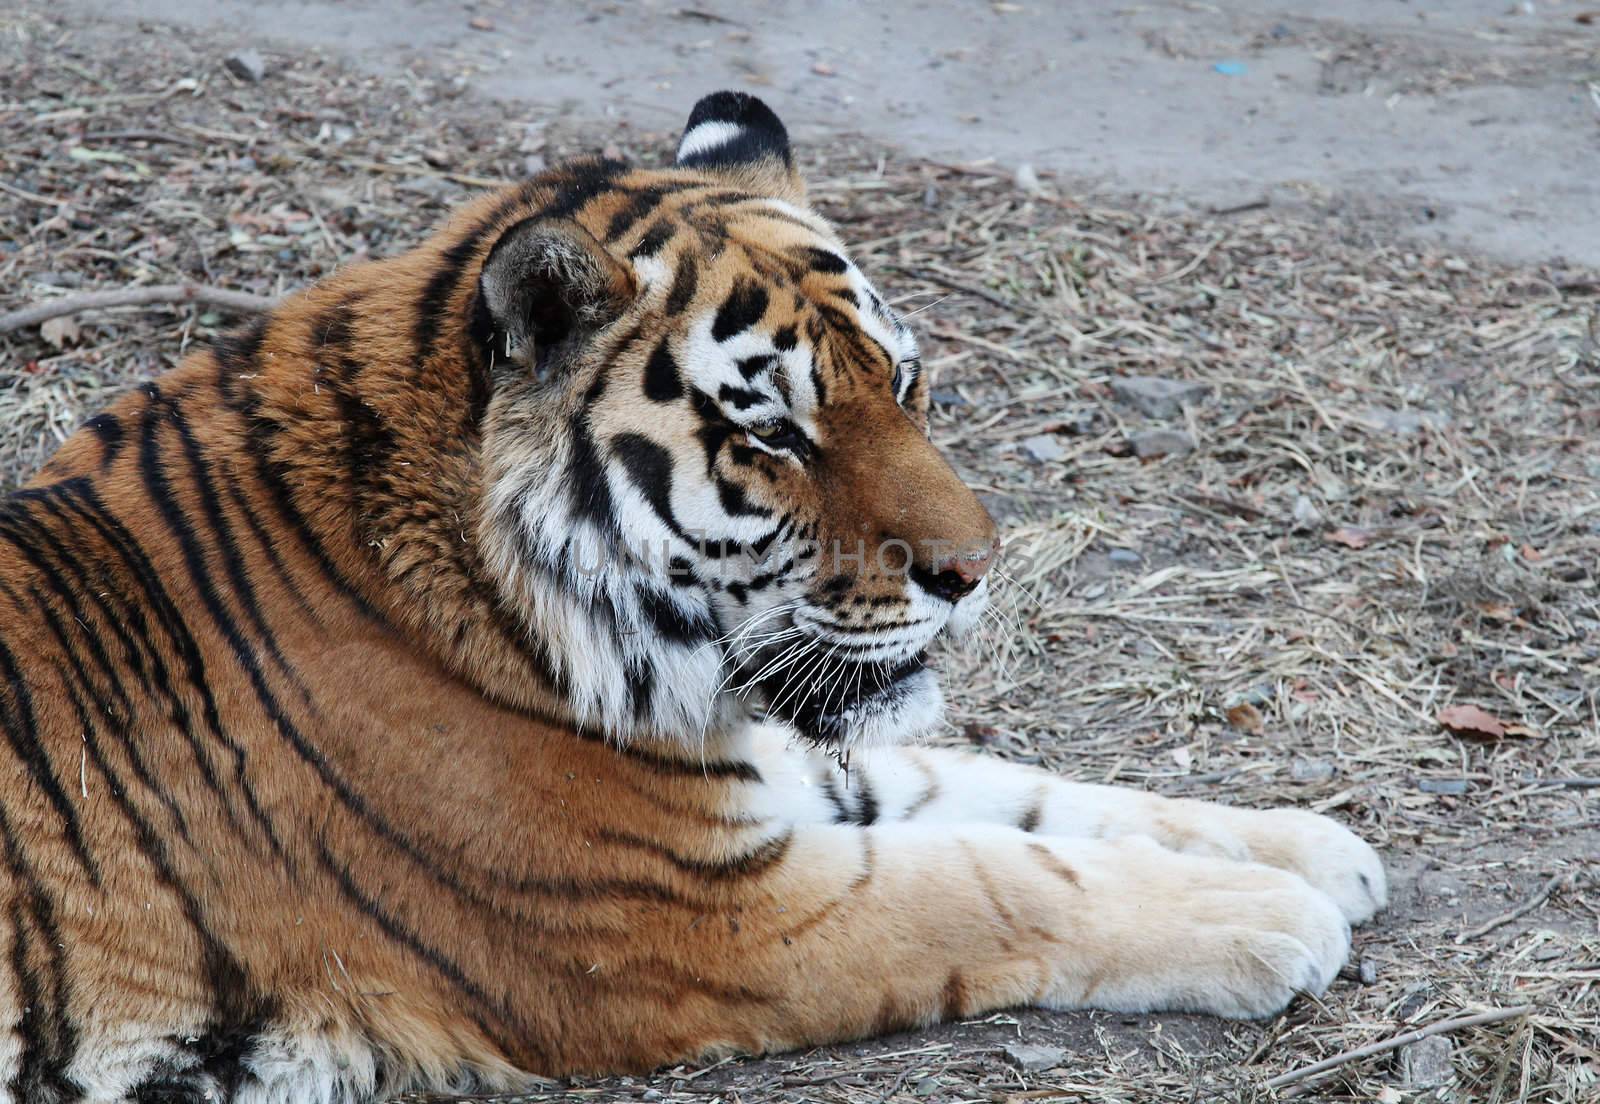 A northeast tiger lay on the grass in the Beijing zoo in winter